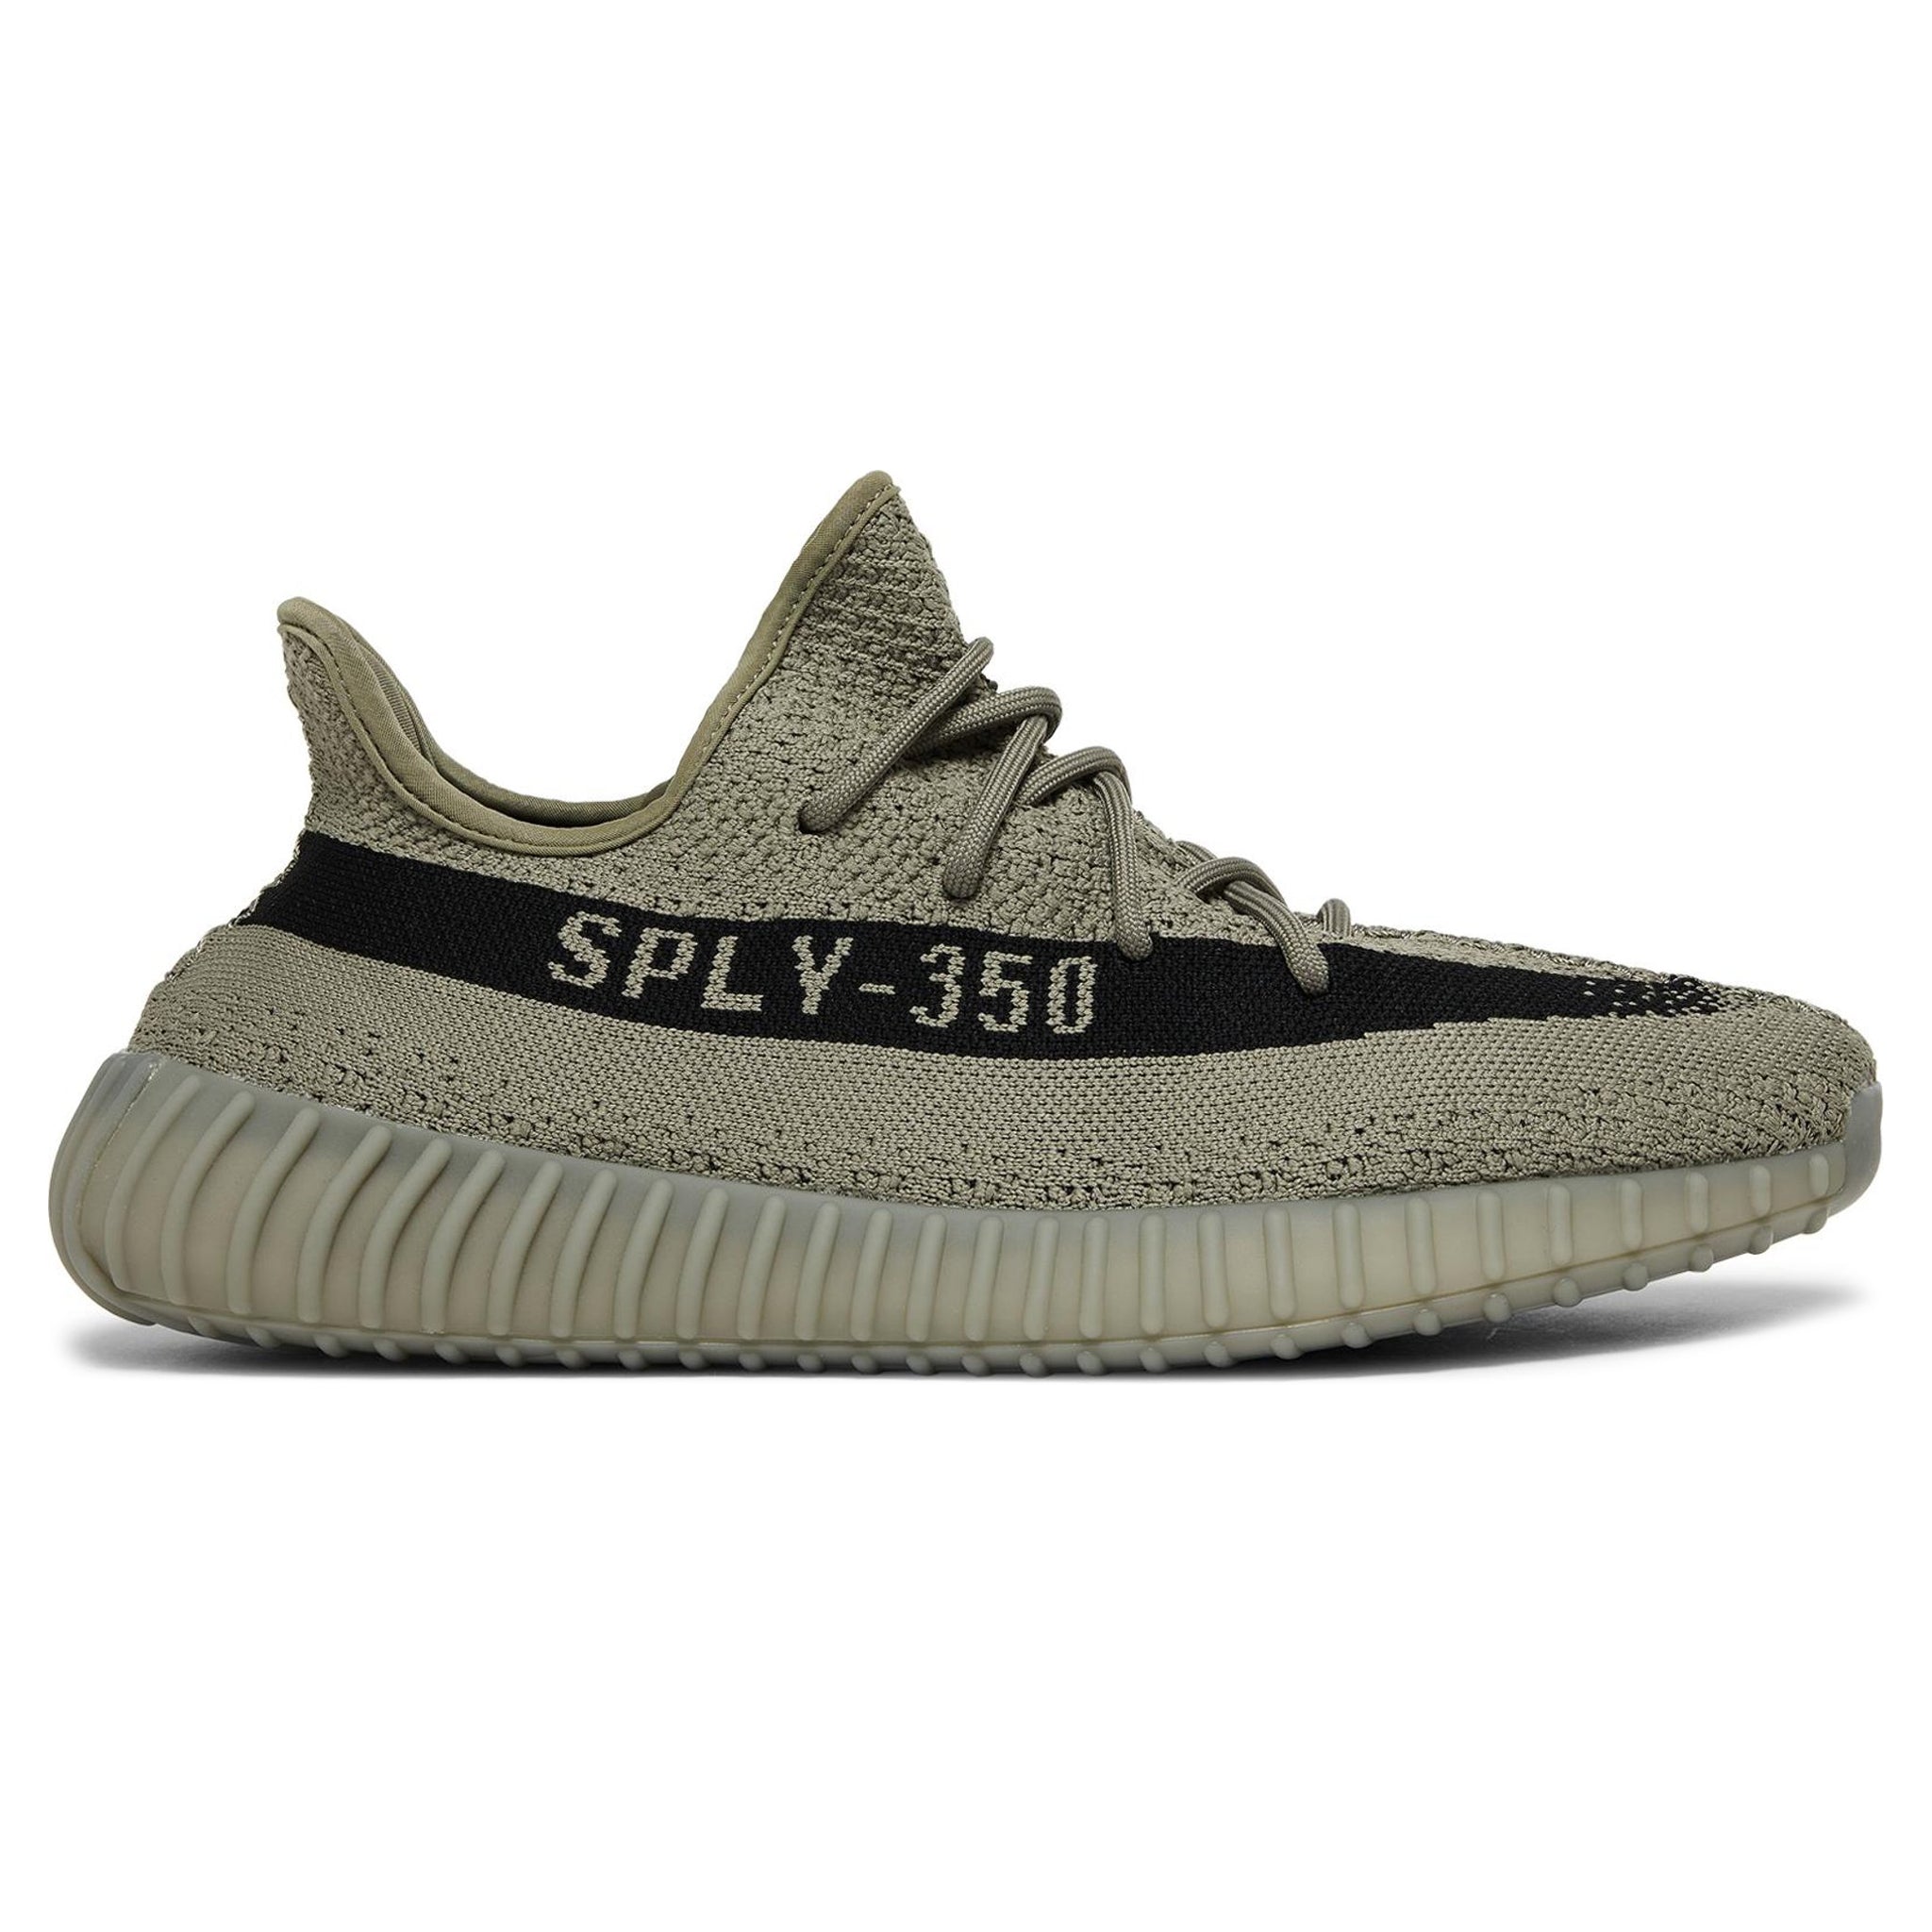 Side view of Adidas Yeezy Boost 350 V2 Granite HQ2059